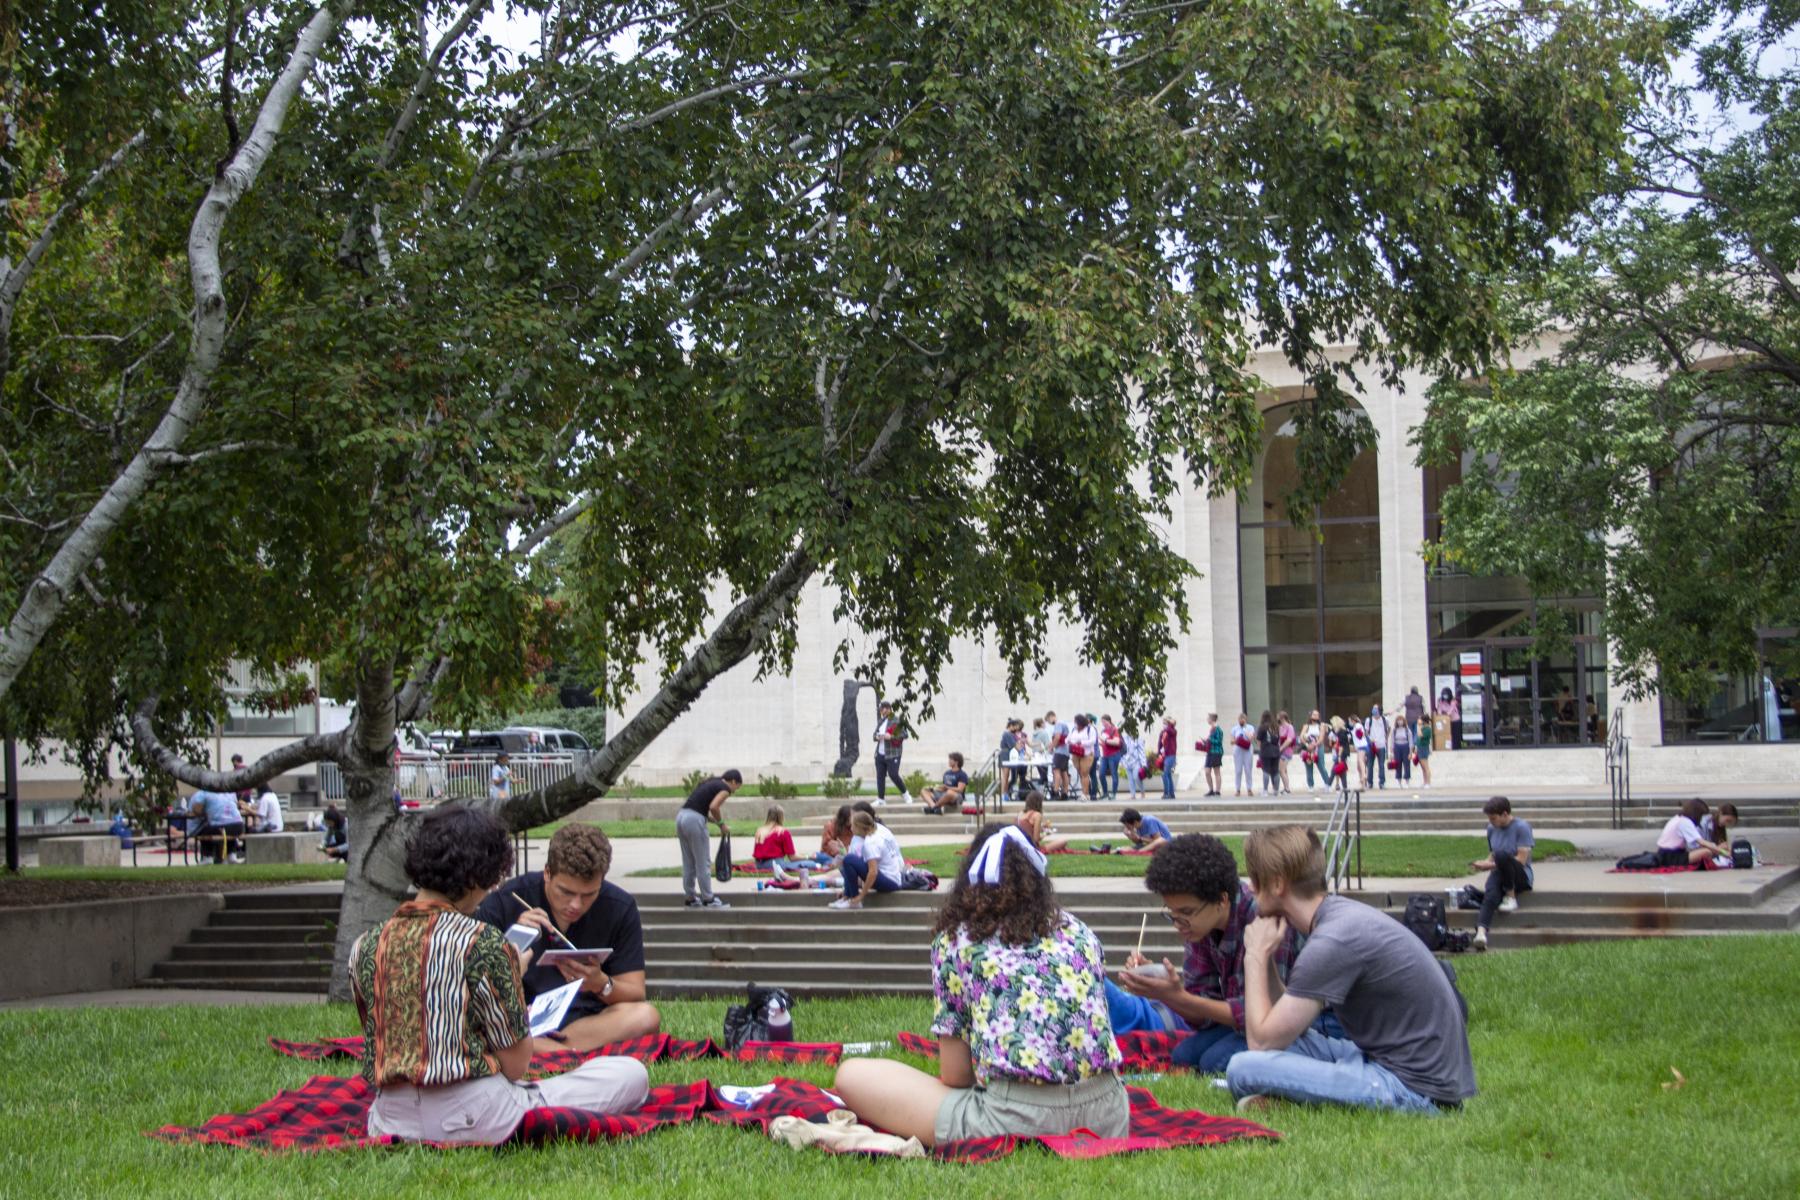 Students sit on blankets outdoors